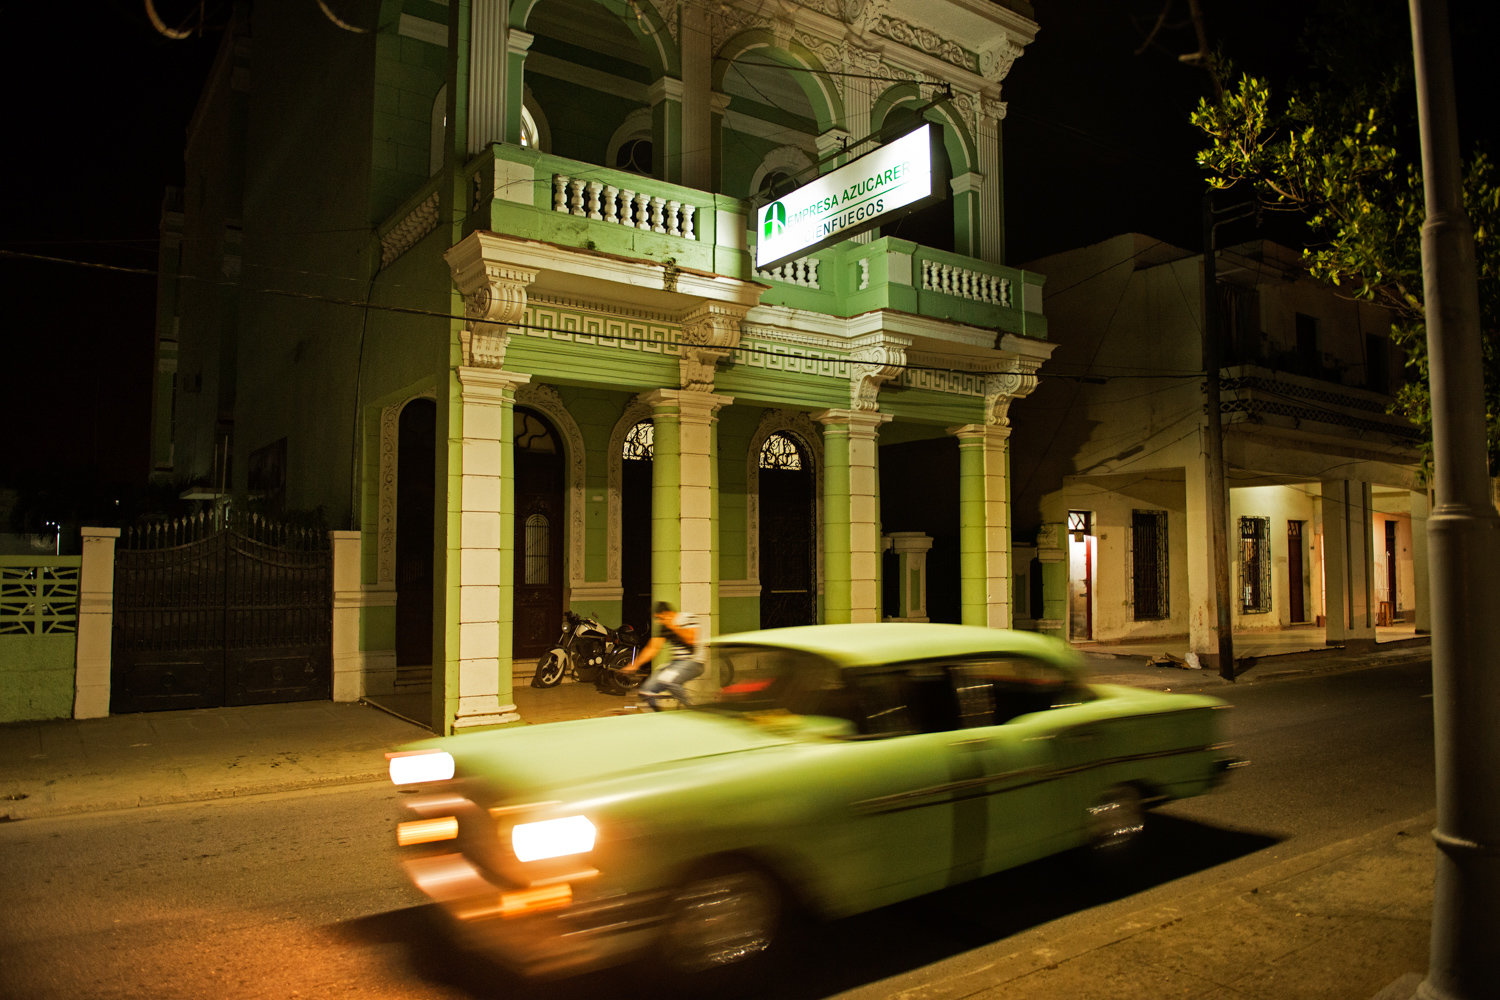 John Conn’s late-night image of a street scene in Cuba is included in the exhibition ‘Picture This,’ on display at Elisa Contemporary Art through Jan. 15.